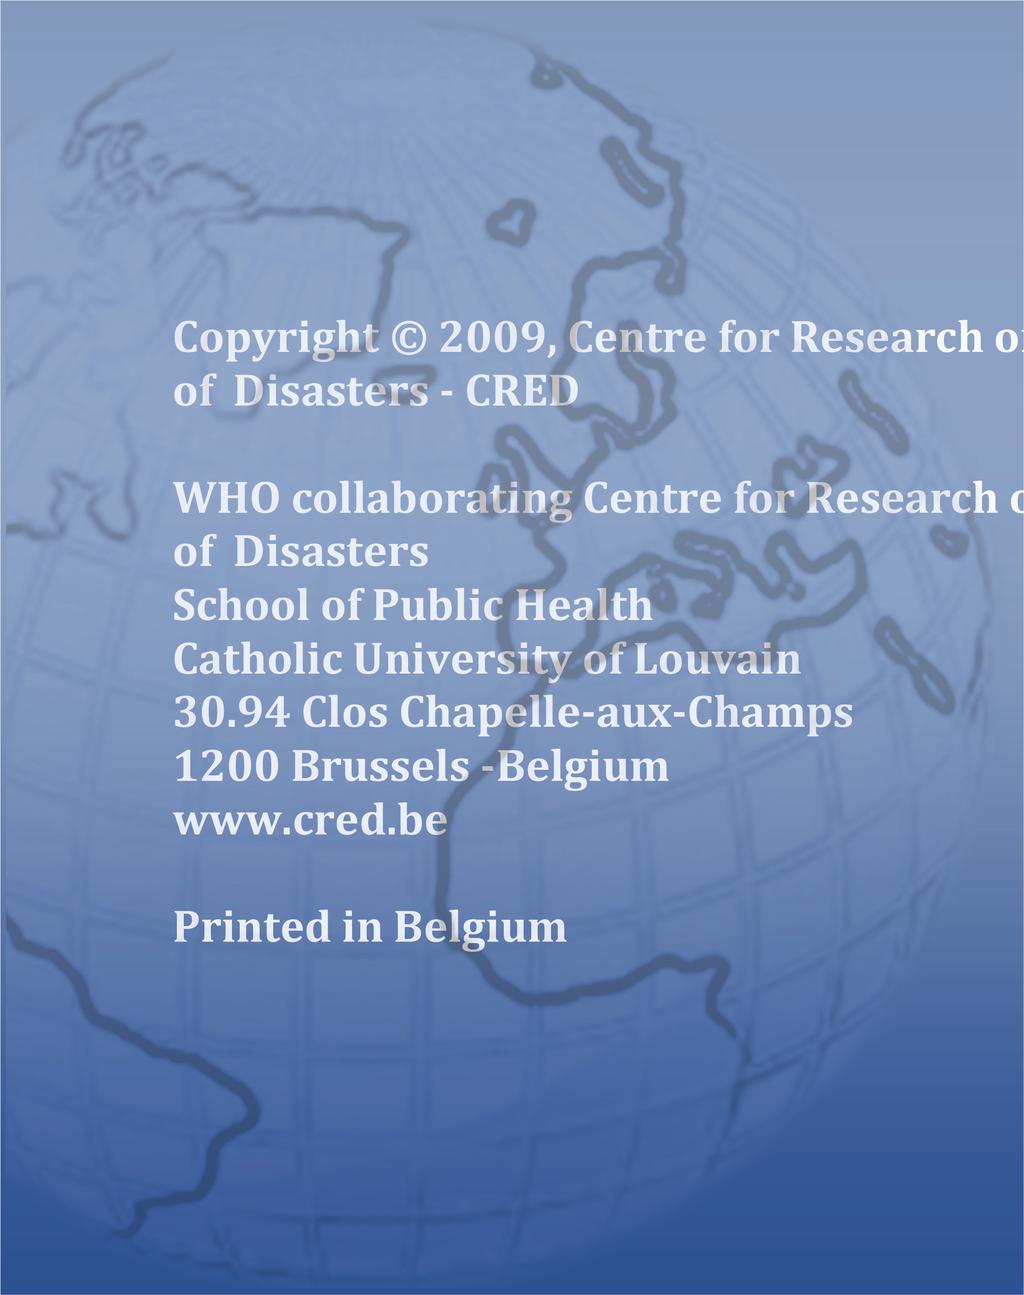 Copyright 2009, Centre for Research on the Epidemiology of Disasters - CRED WHO collaborating Centre for Research on the Epidemiology of